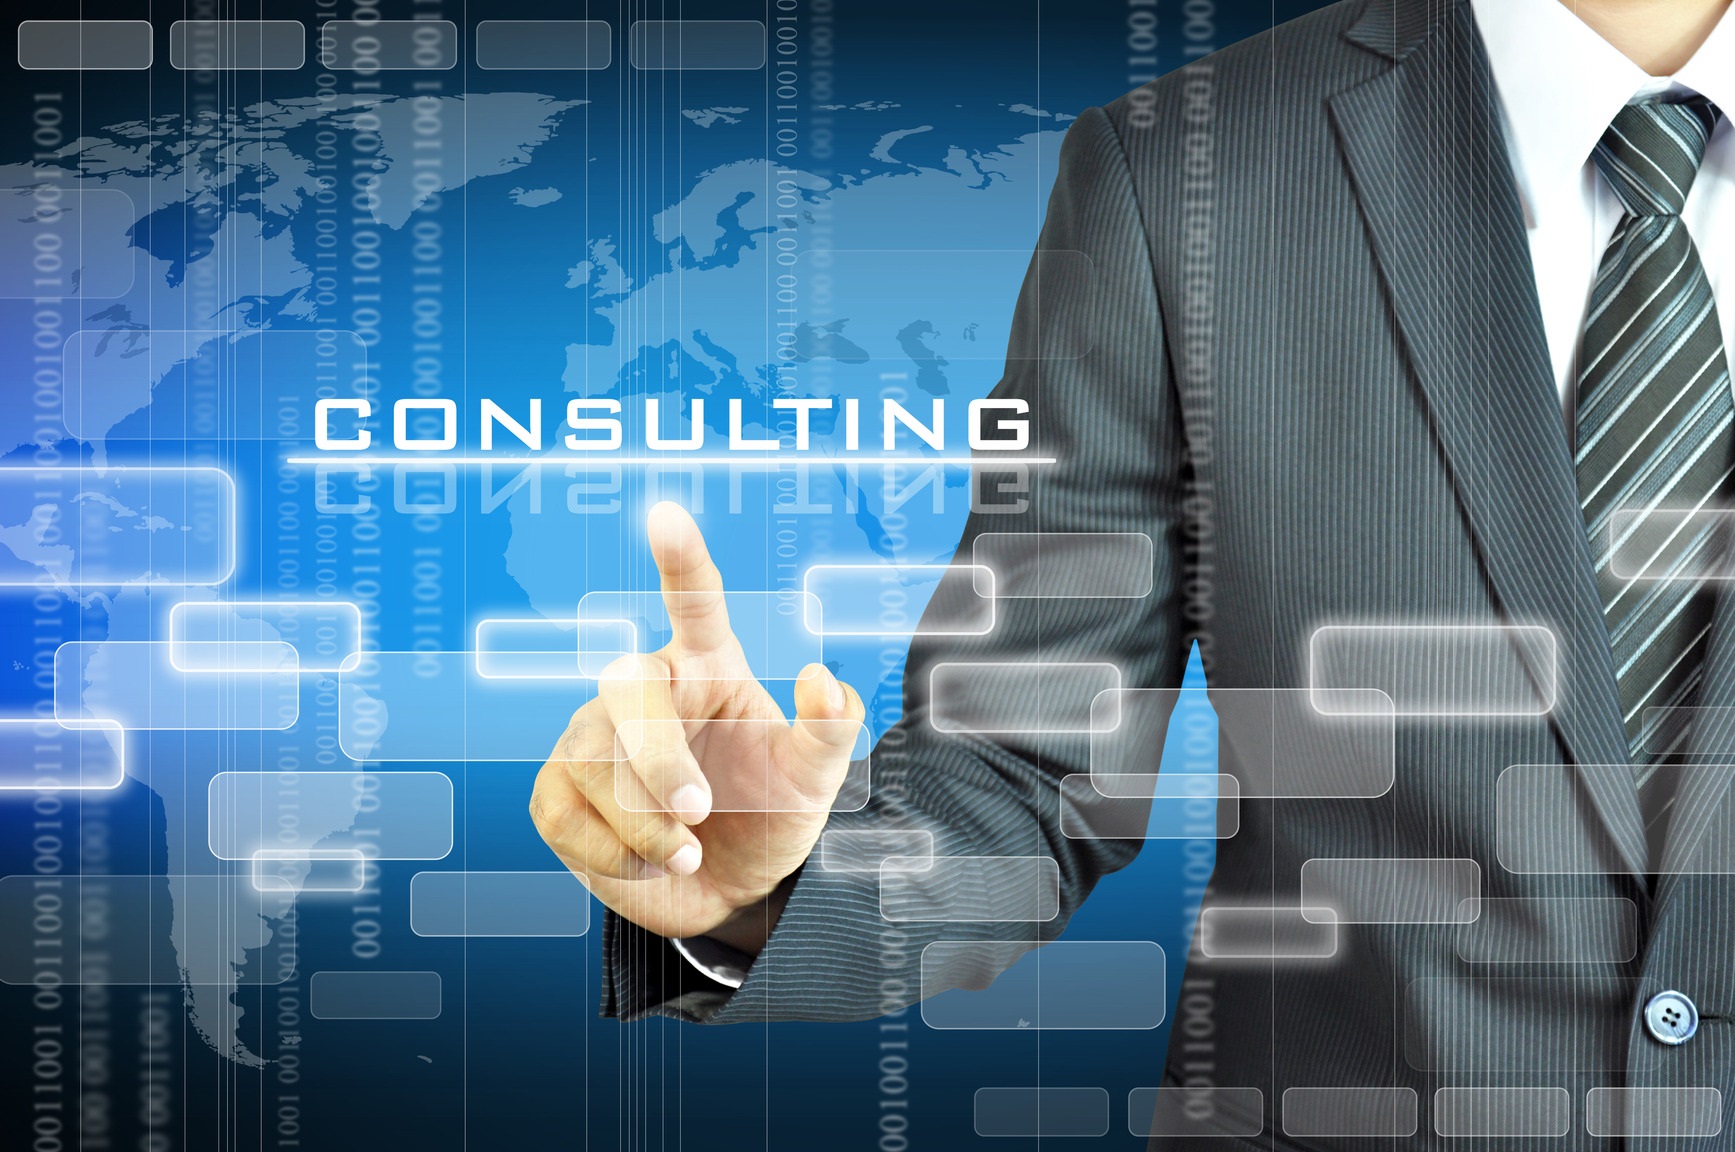 Consulting Expert Advice Support Service Business Concept. Stock Photo,  Picture and Royalty Free Image. Image 96158919.